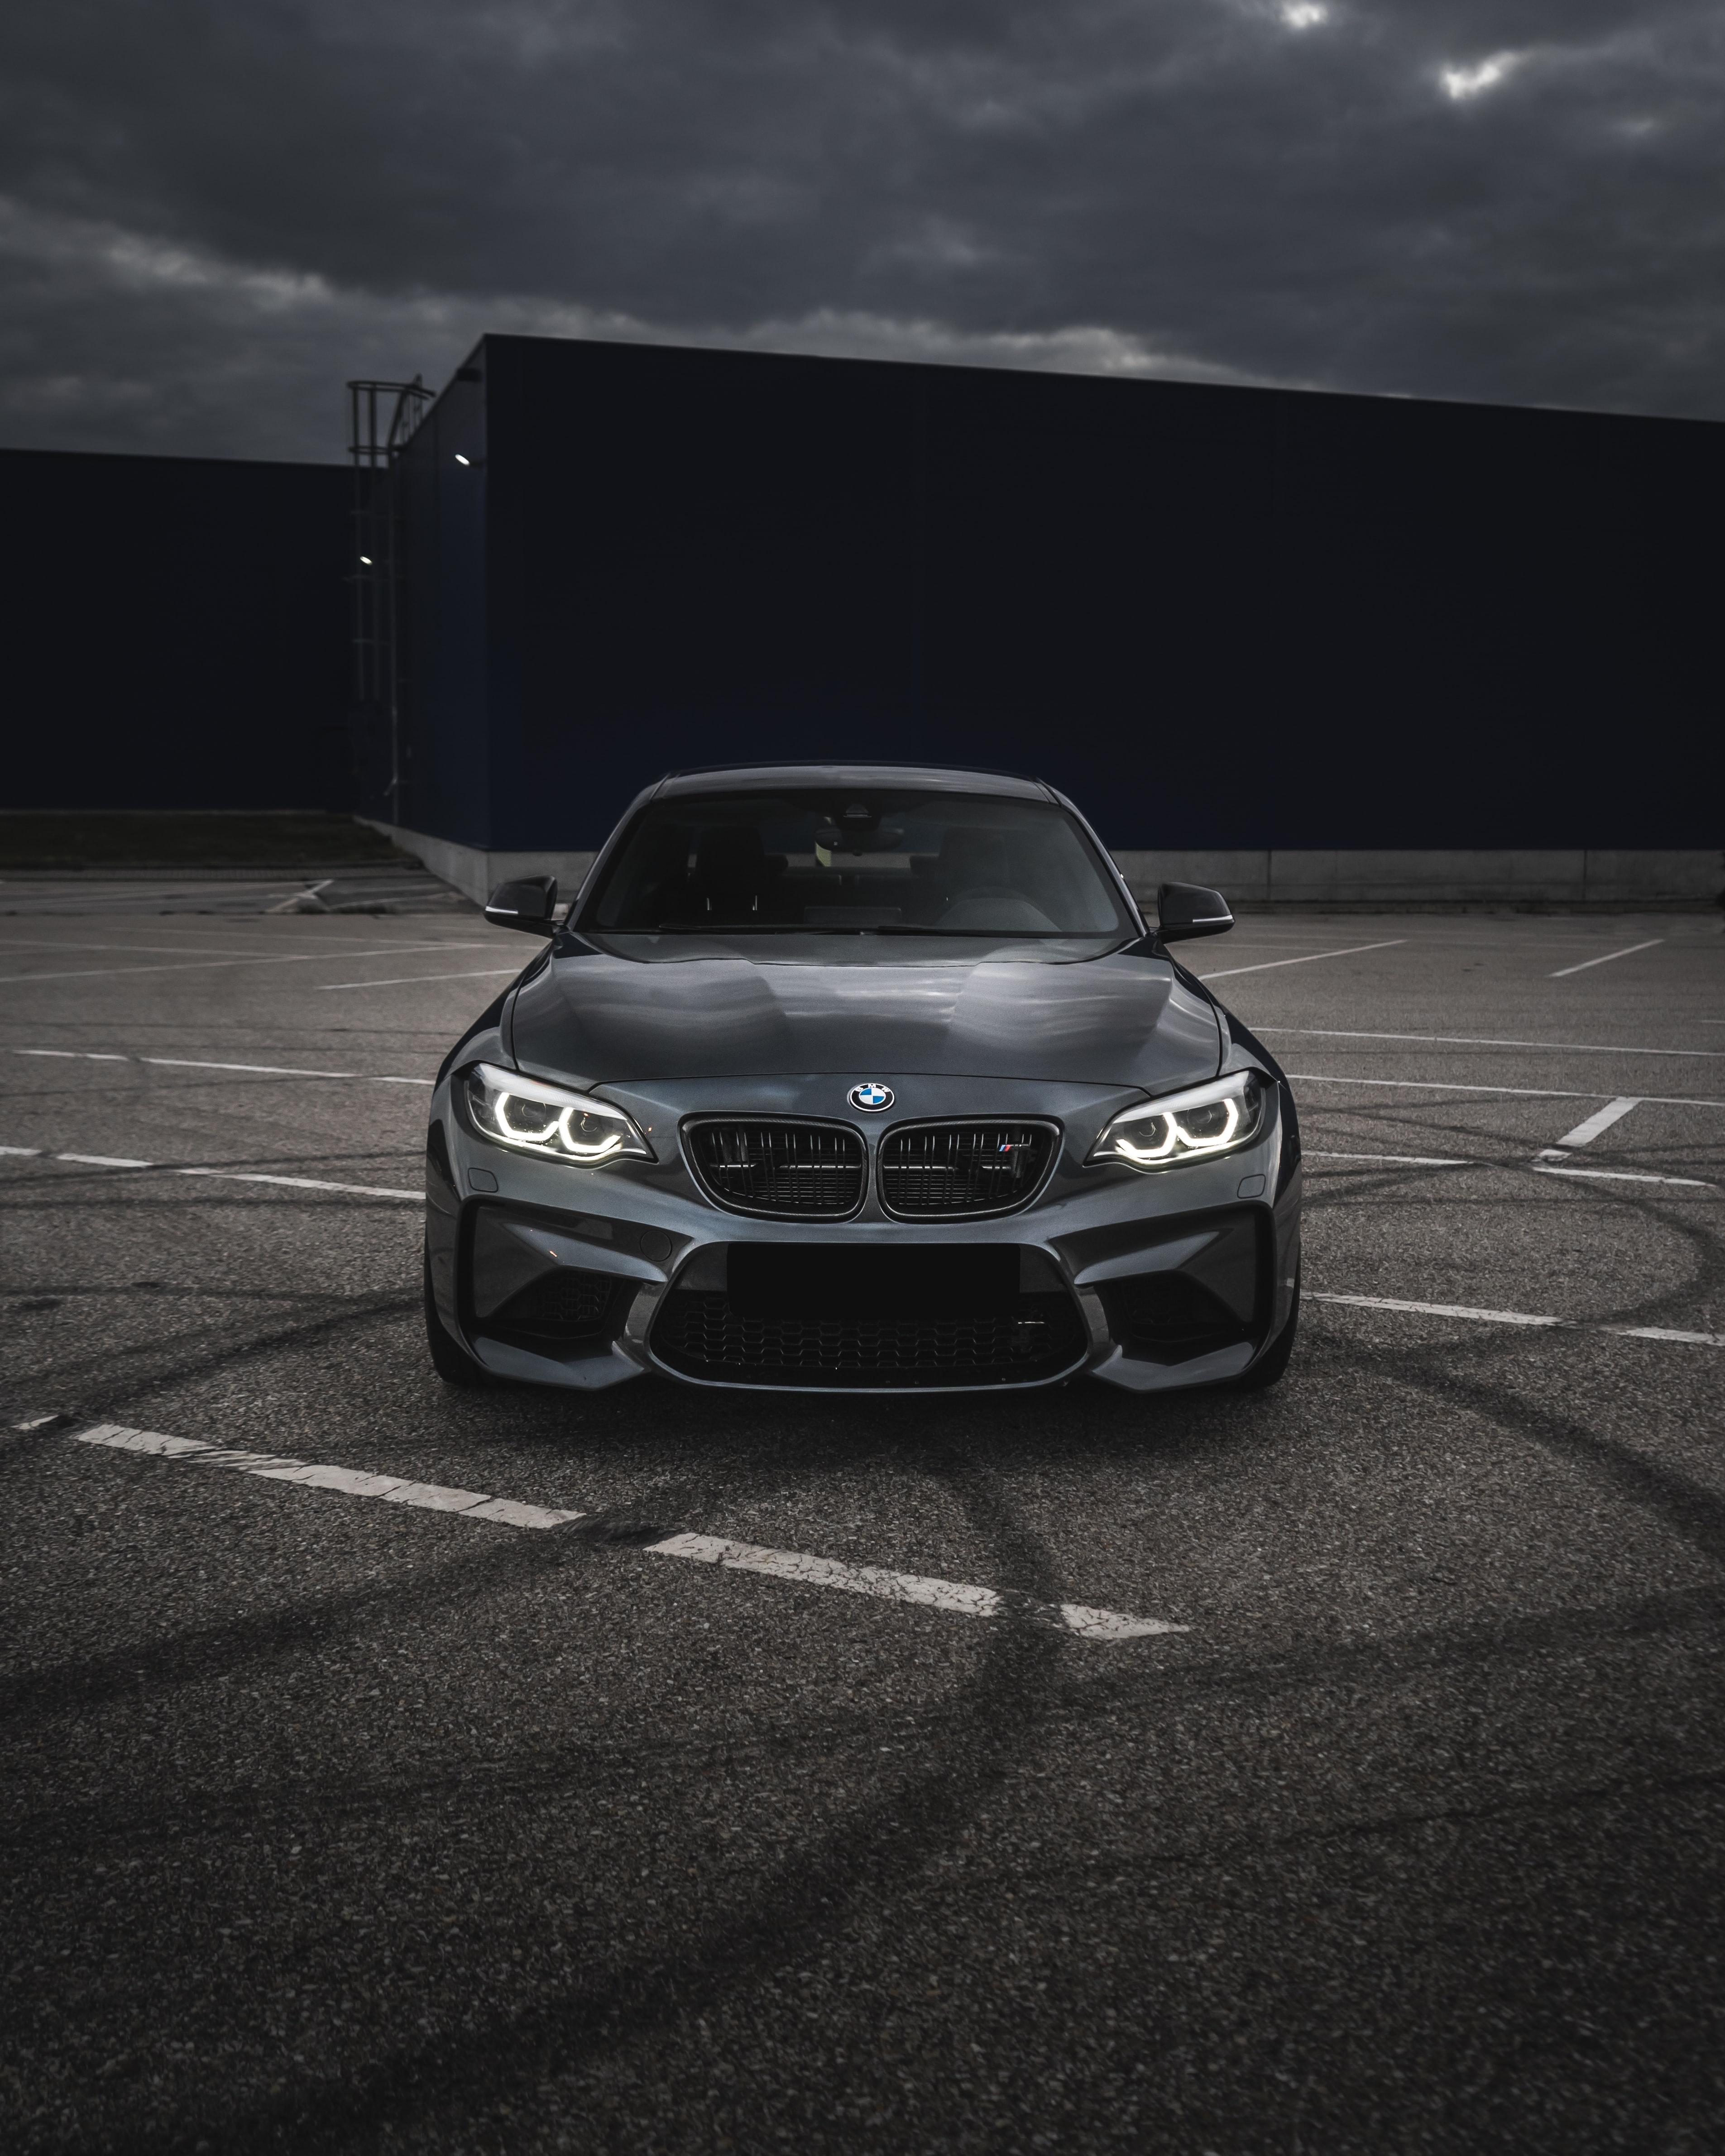 84120 download wallpaper bmw, car, cars, bmw m3, front view, grey screensavers and pictures for free